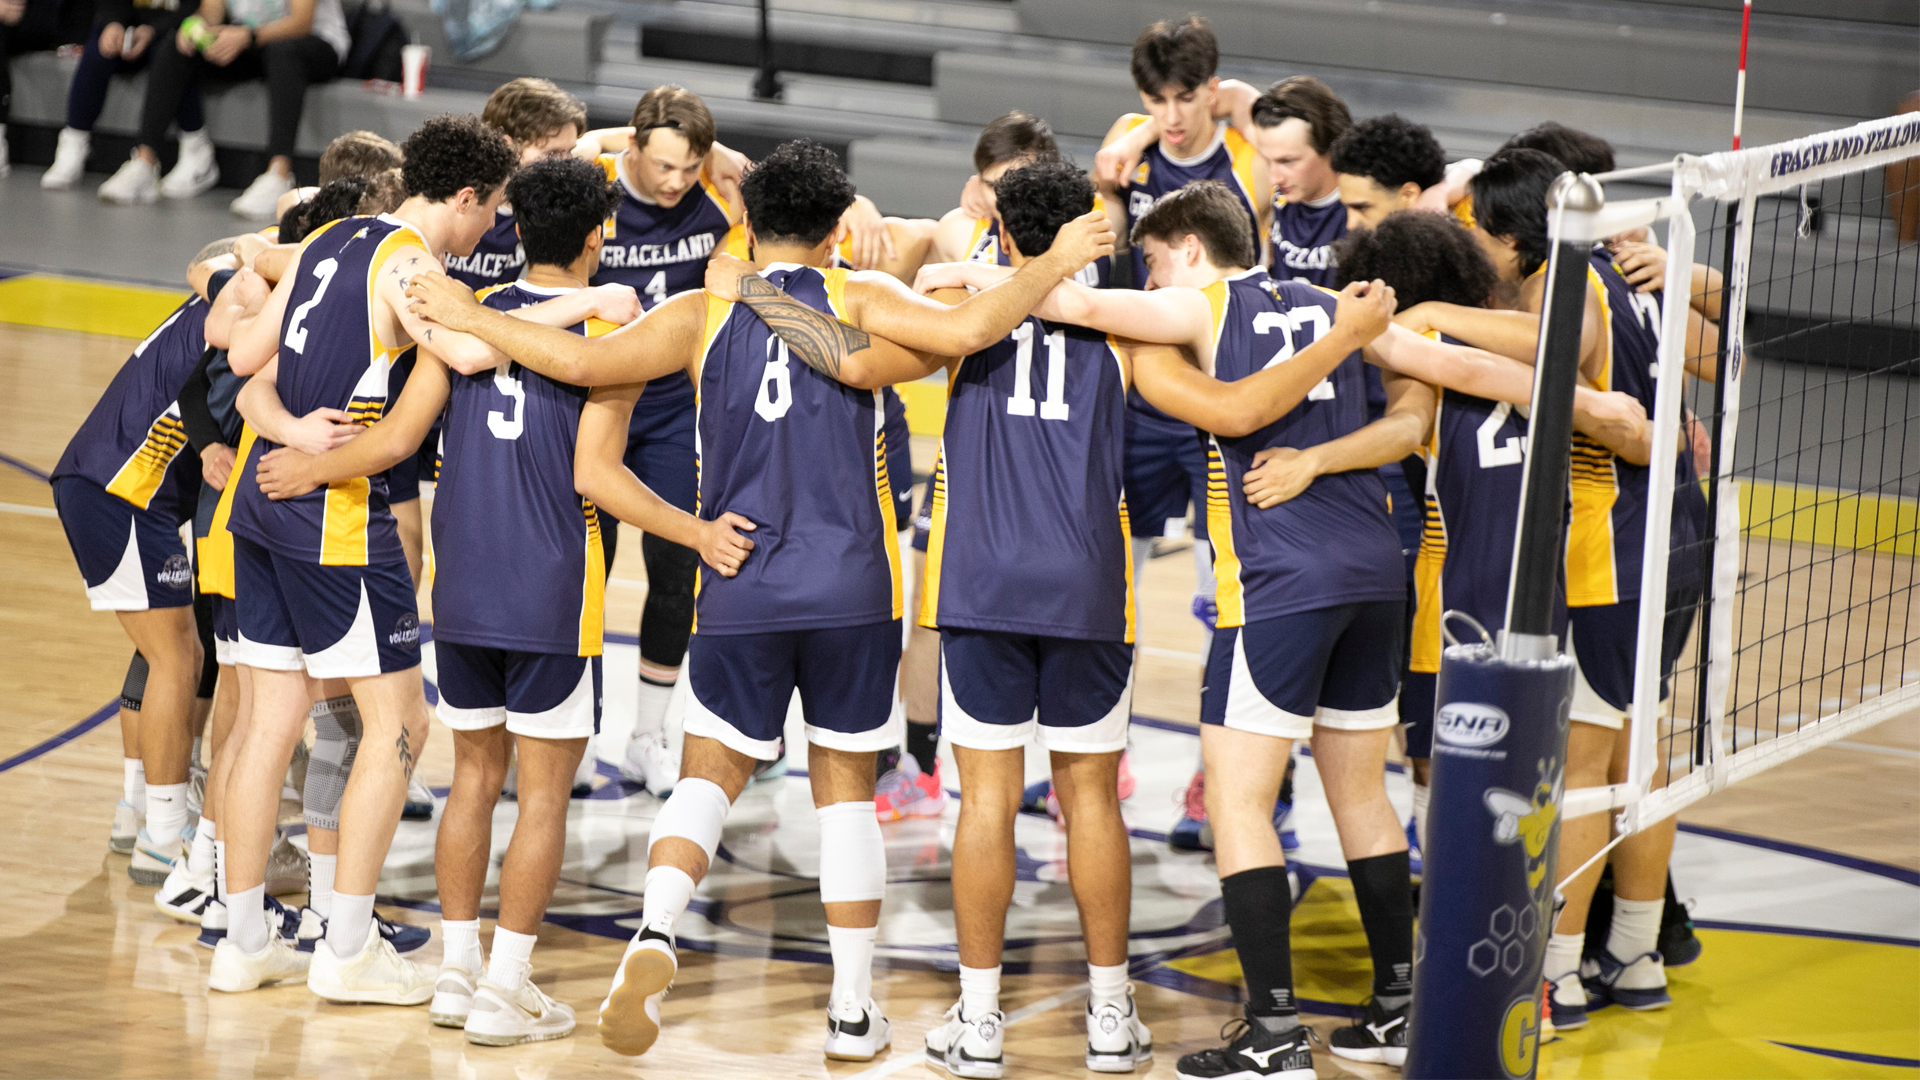 Men’s Volleyball Held by William Penn